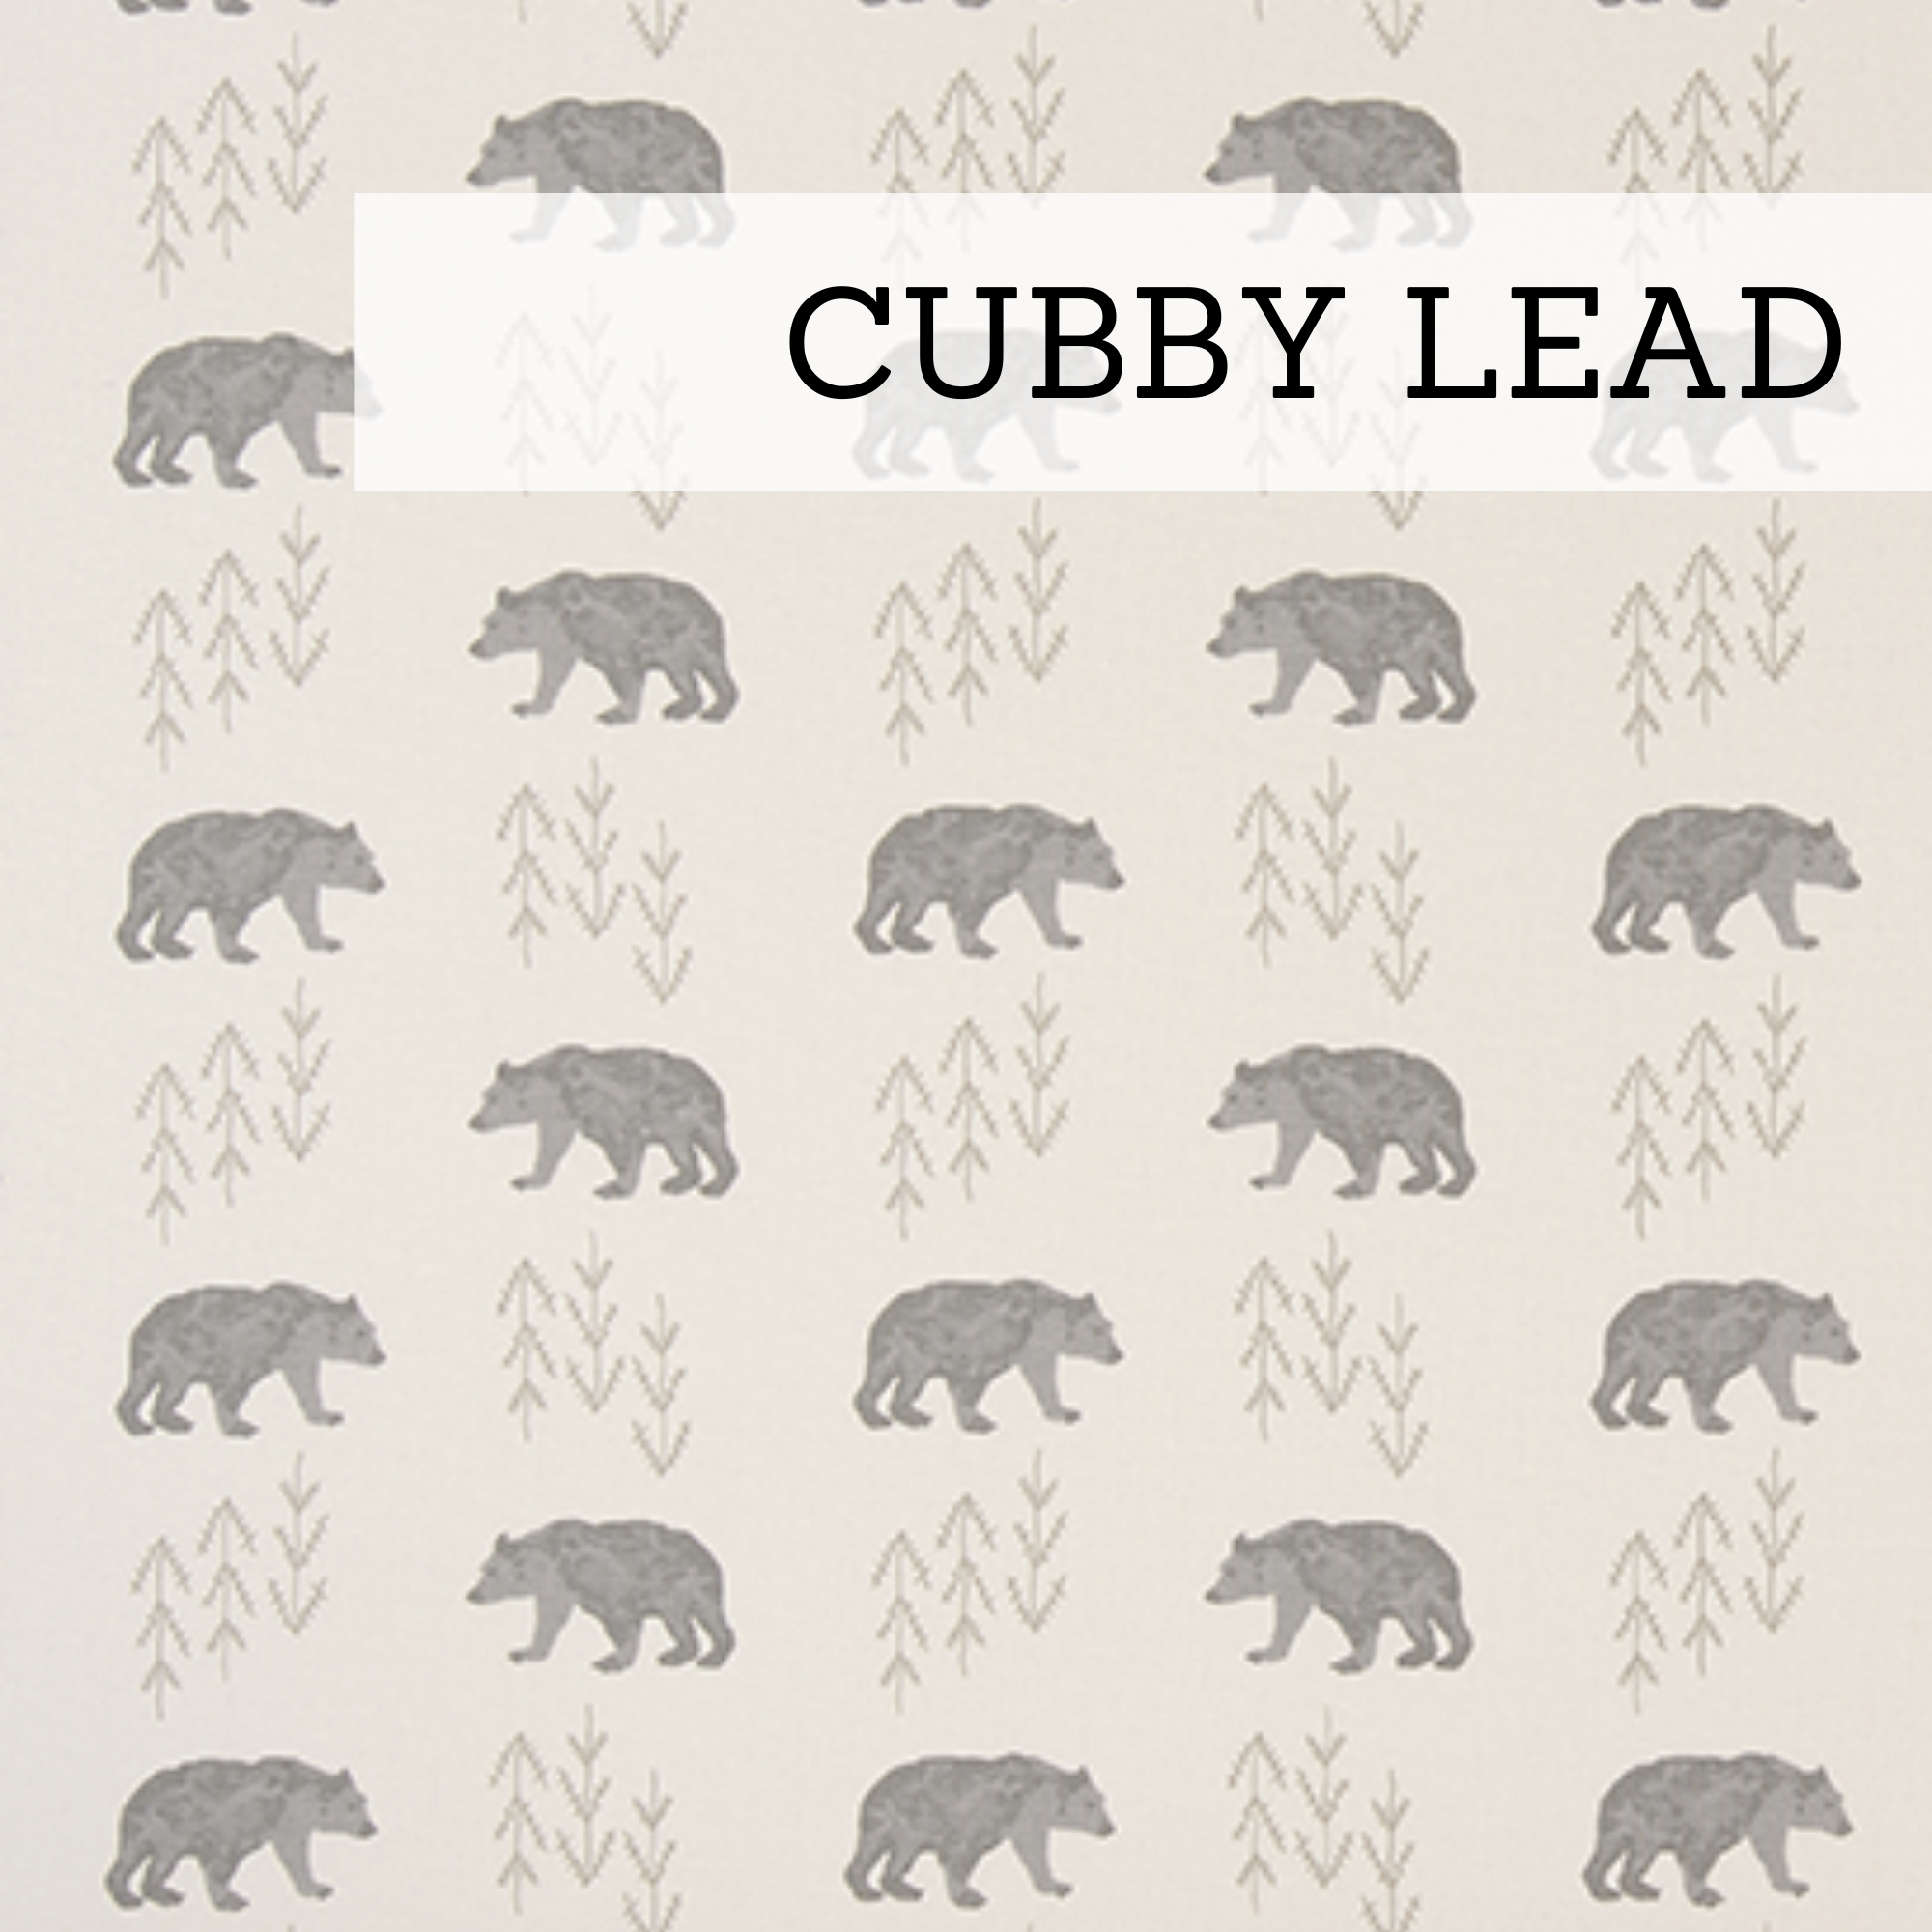 Upholstery fabric for chair cushions with beige background and gray bears